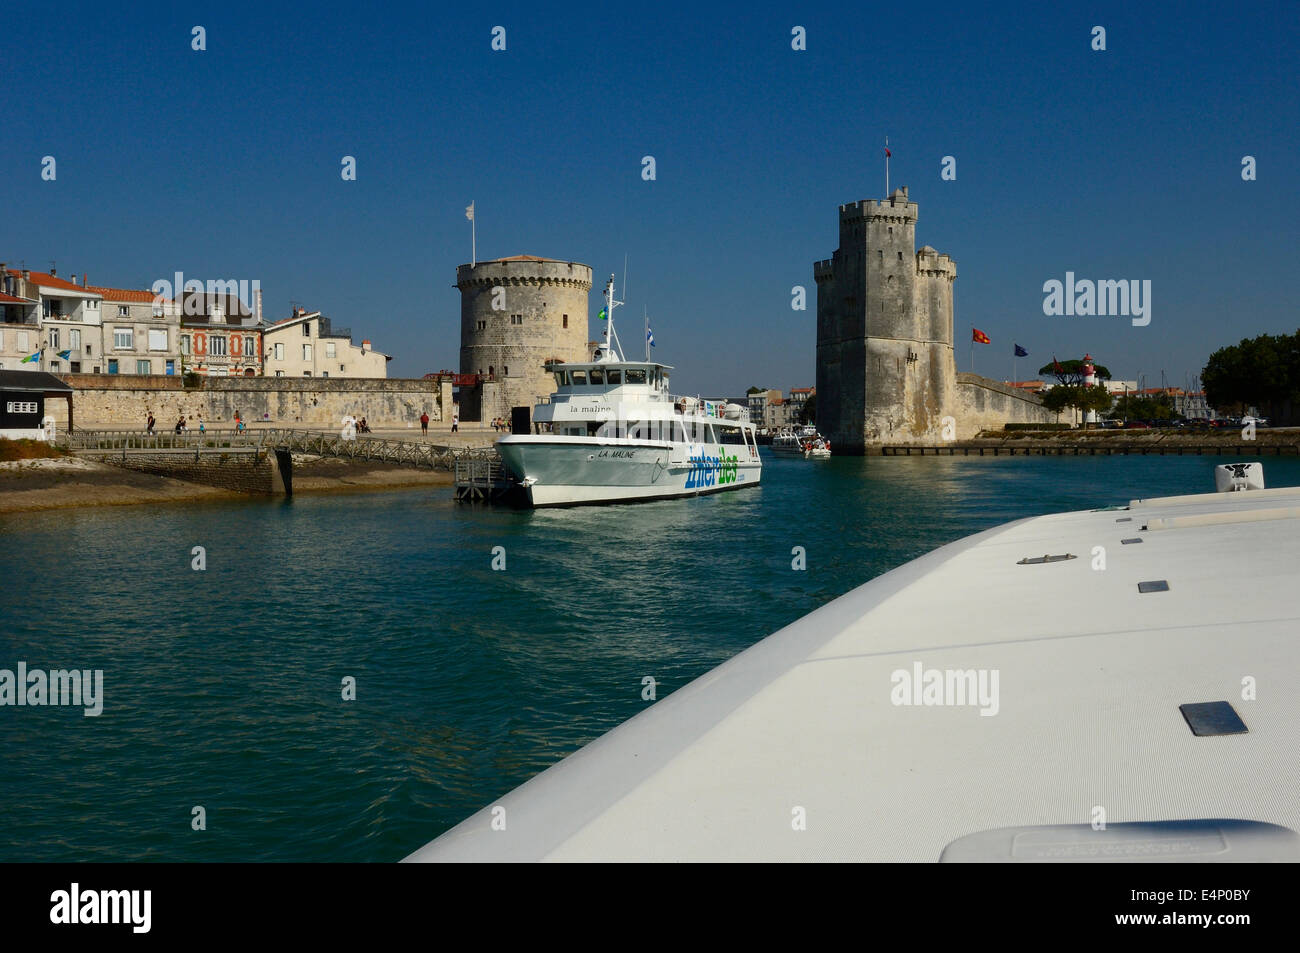 La Chaine, Chain Tower and St. Nicholas towers at the entrance to the ancient port of La Rochelle  Charente-Maritime, France, Europe Stock Photo